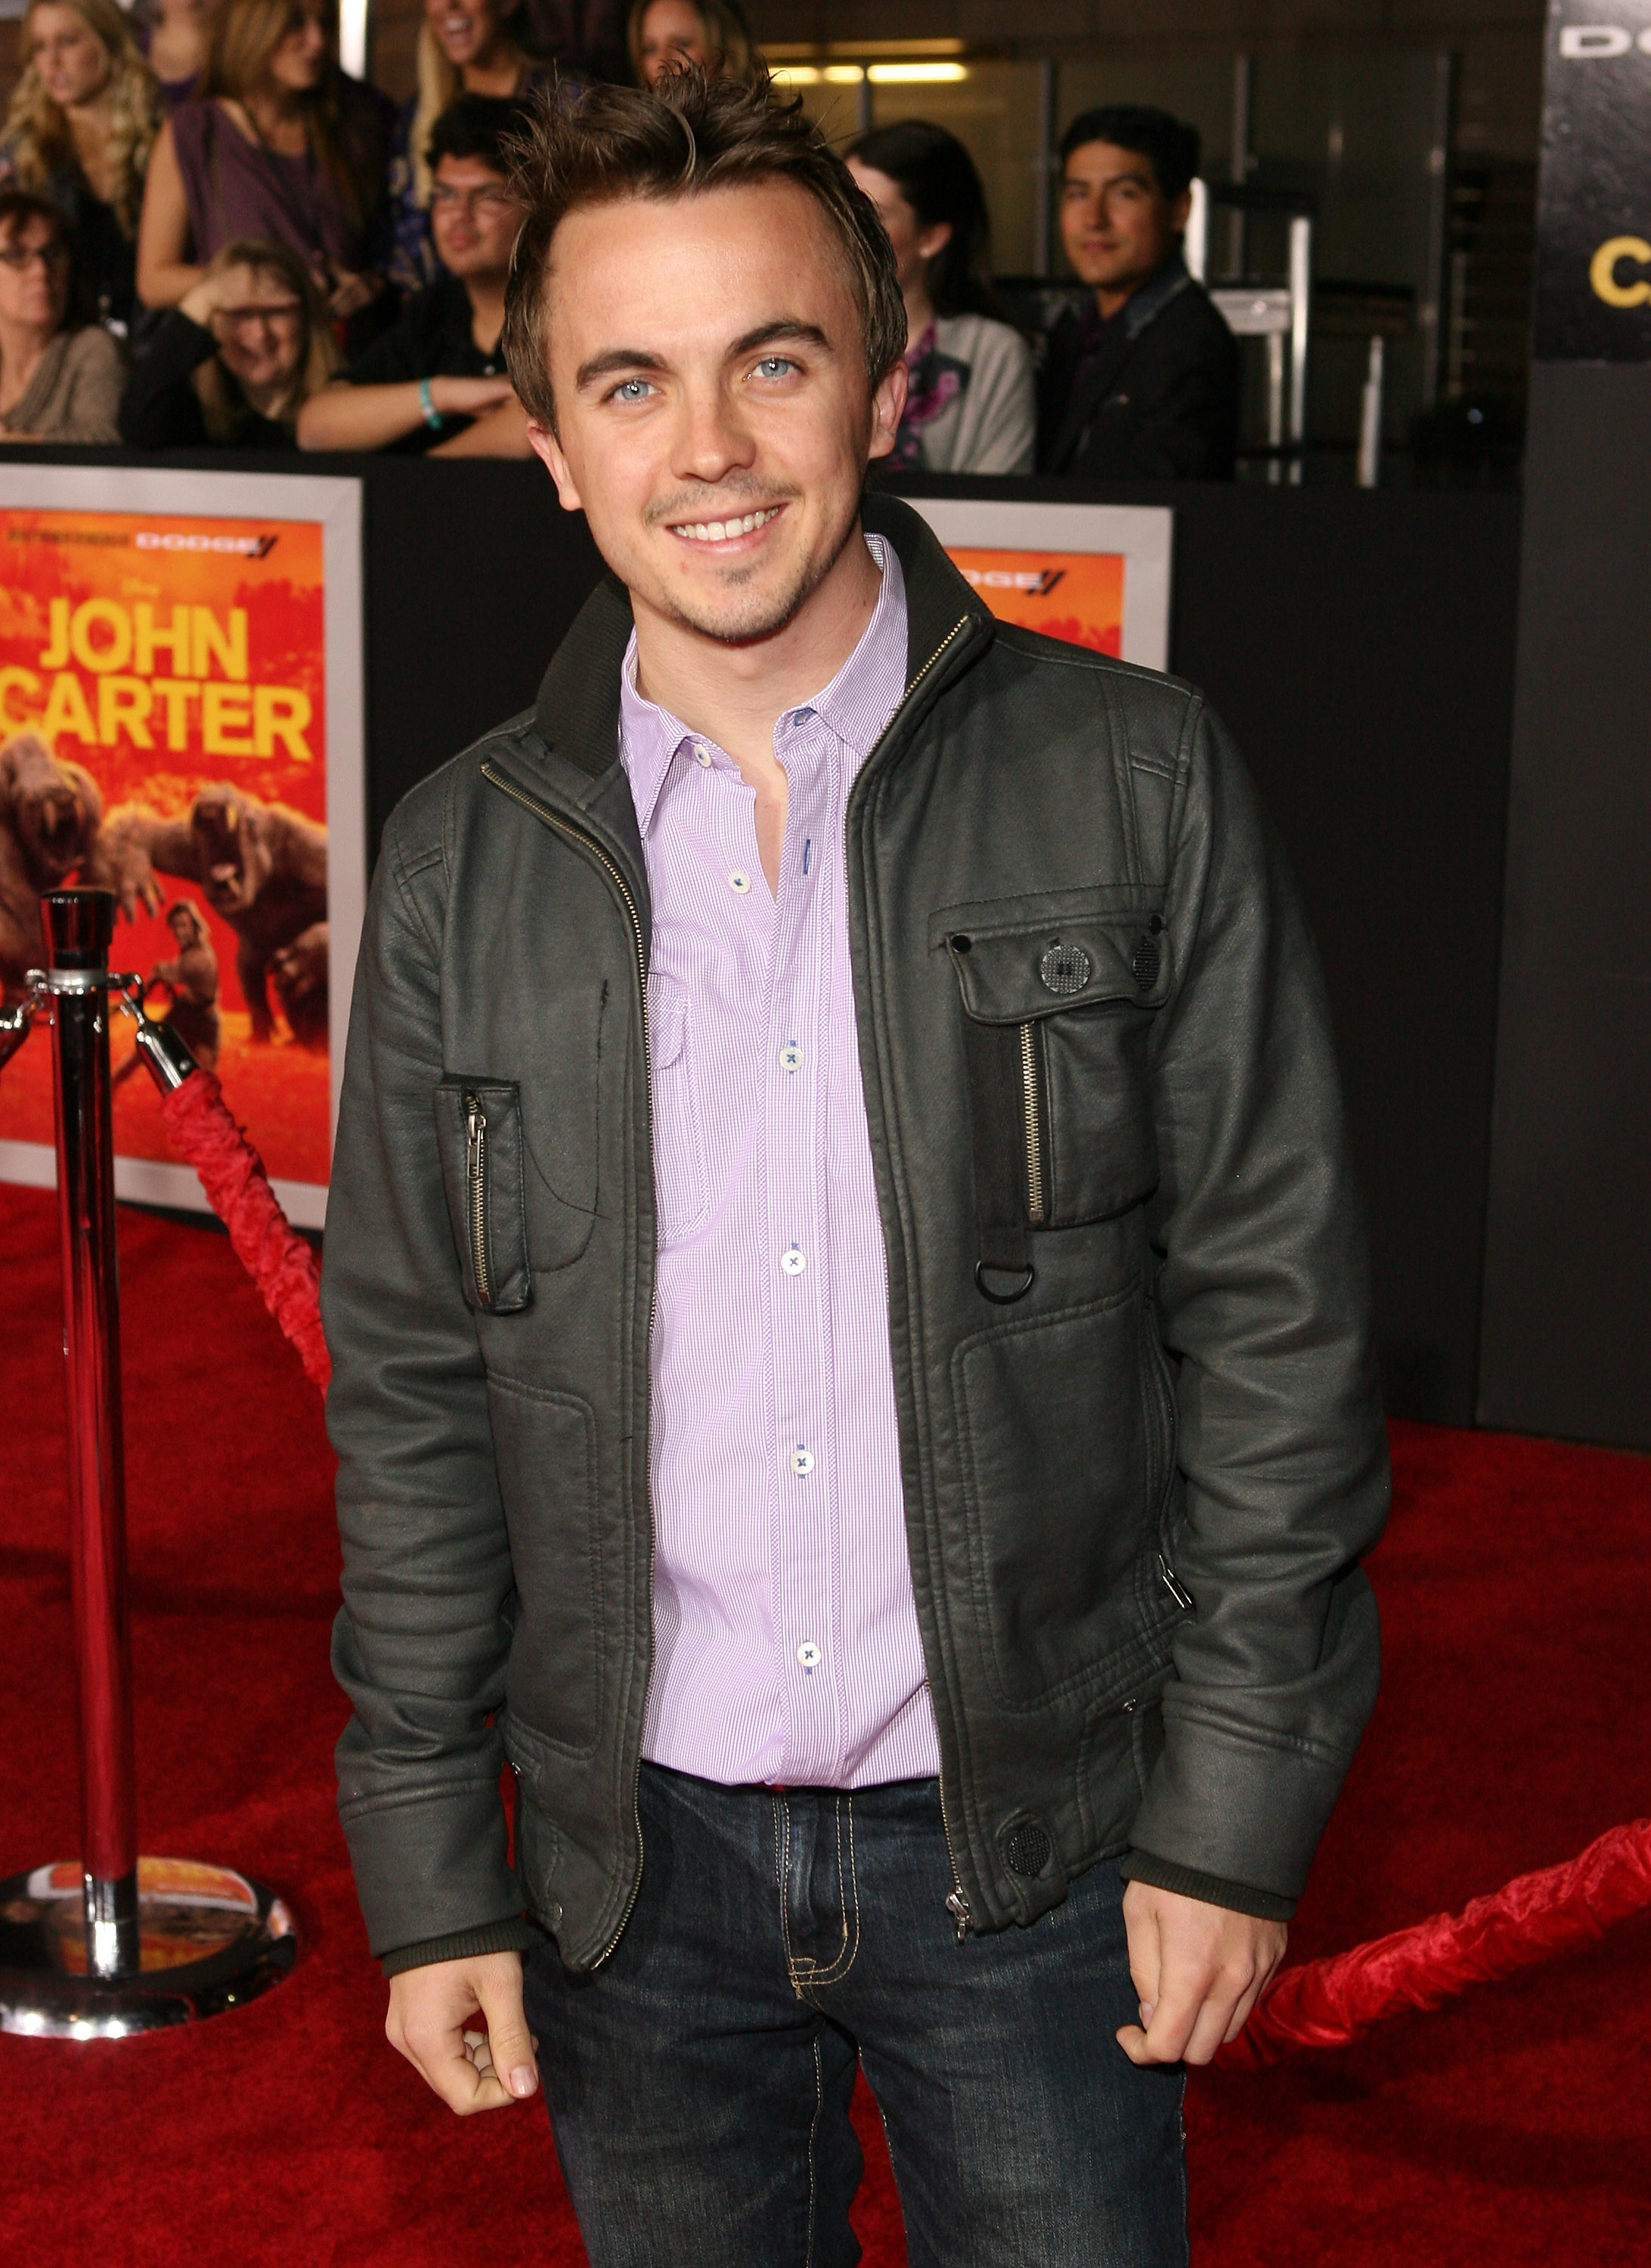 Frankie Muniz attends the premiere of "John Carter" on February 22, 2012 in Los Angeles, California | Source: Getty Images